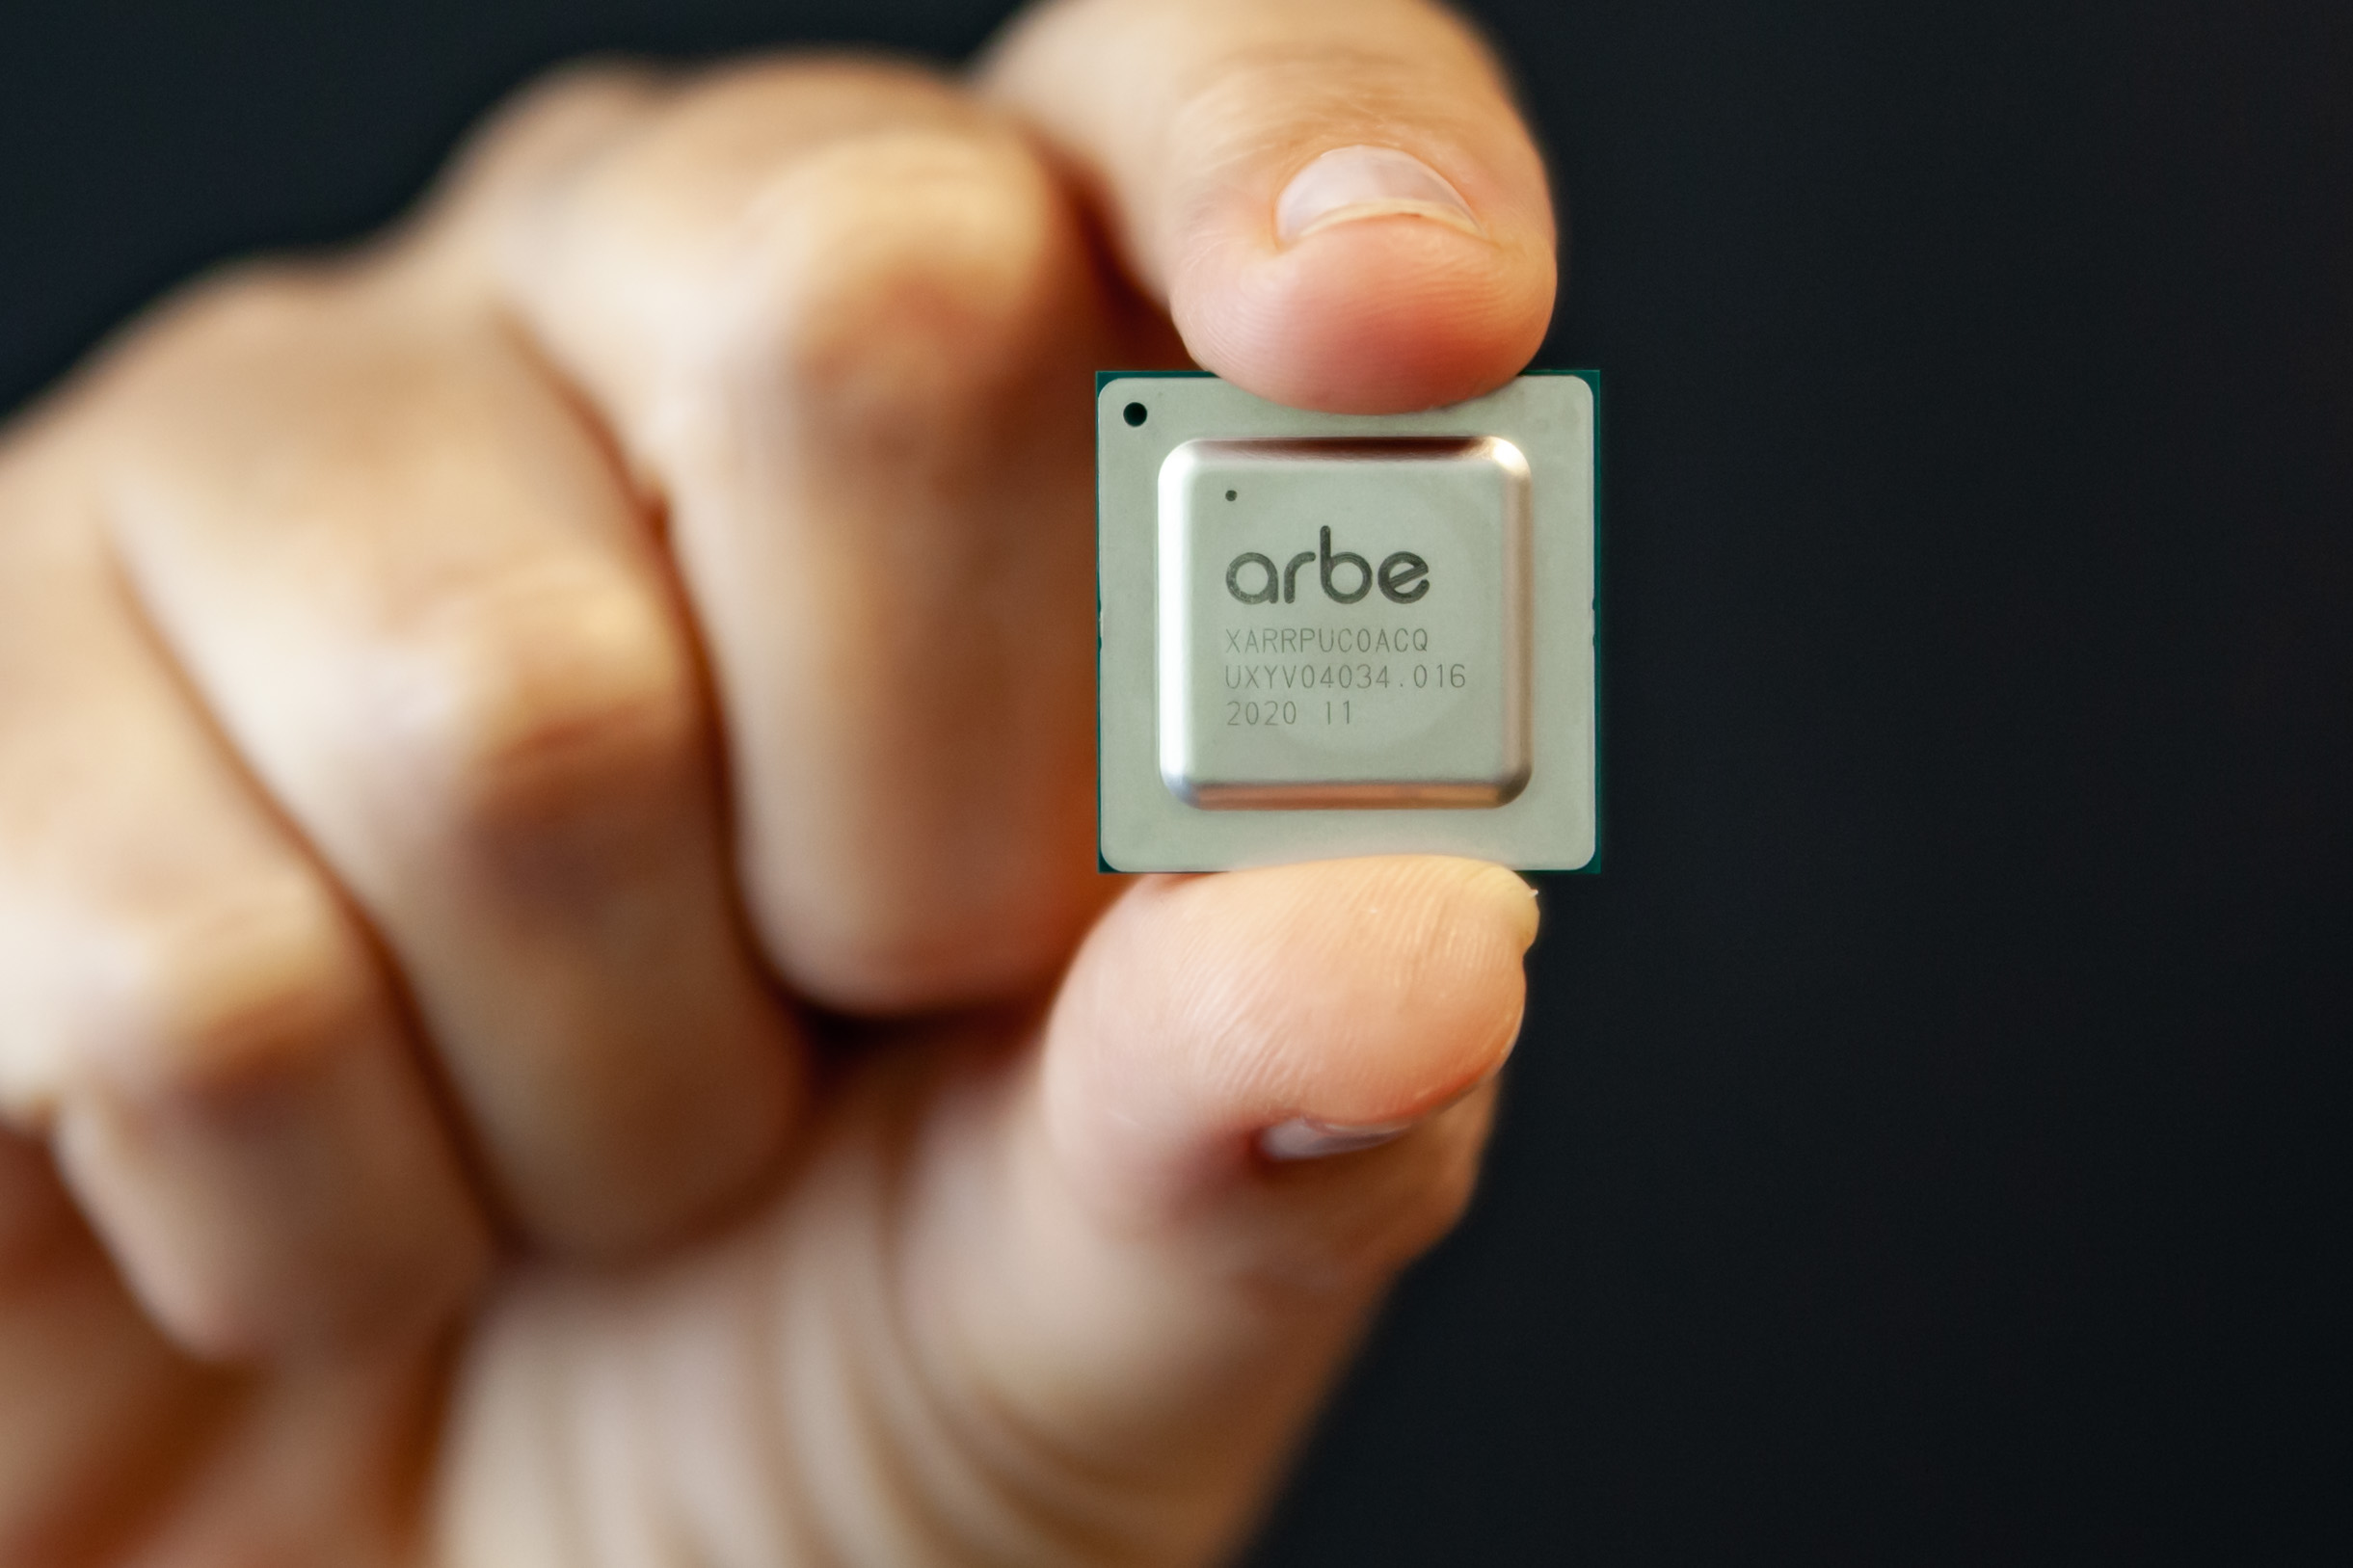 The Processor Chip Launching a Revolution